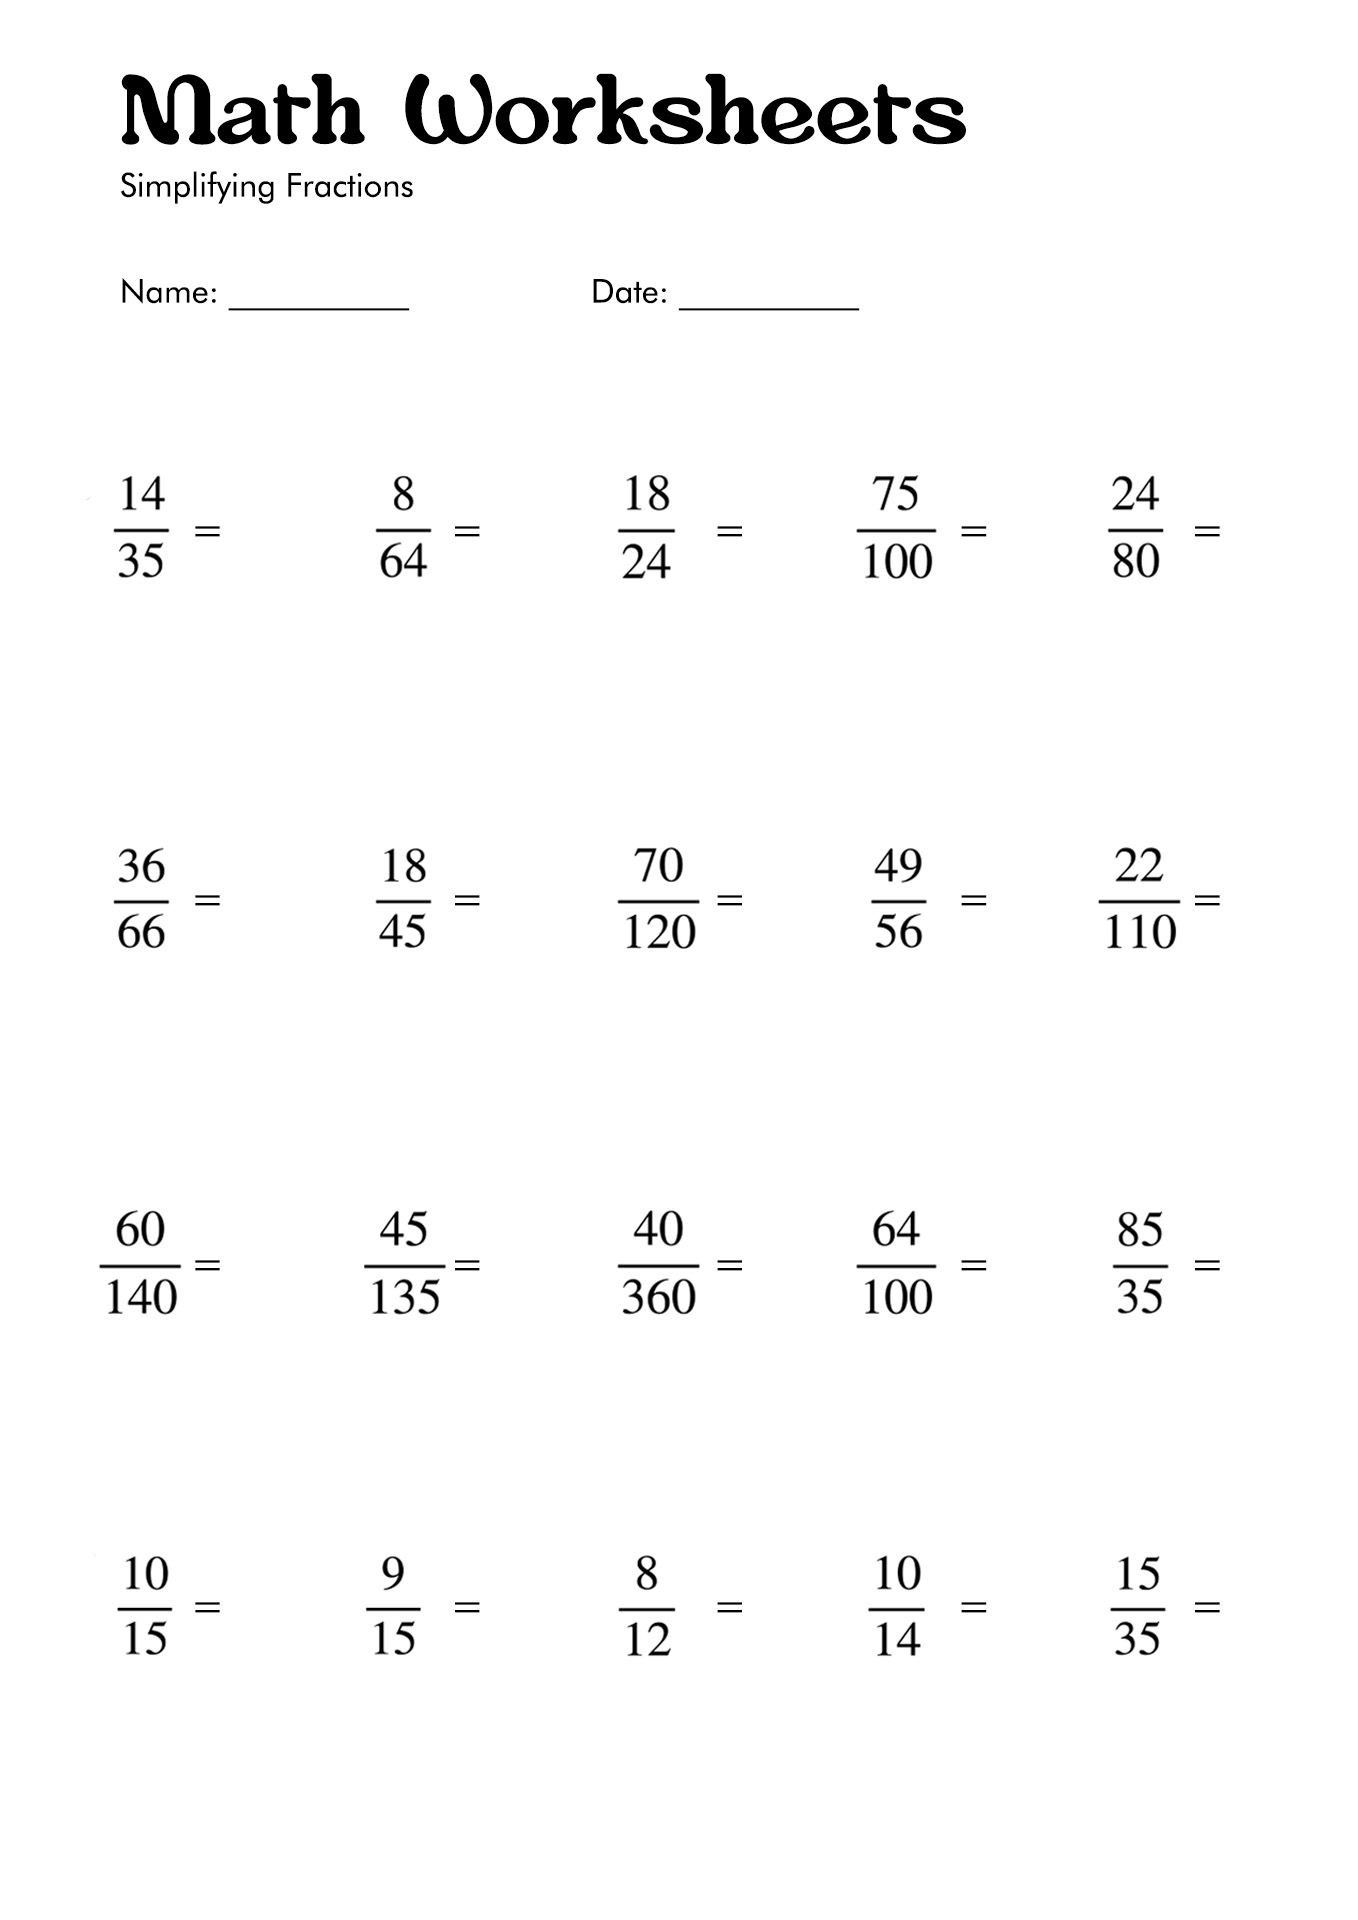 Math Worksheets Simplifying Fractions Image